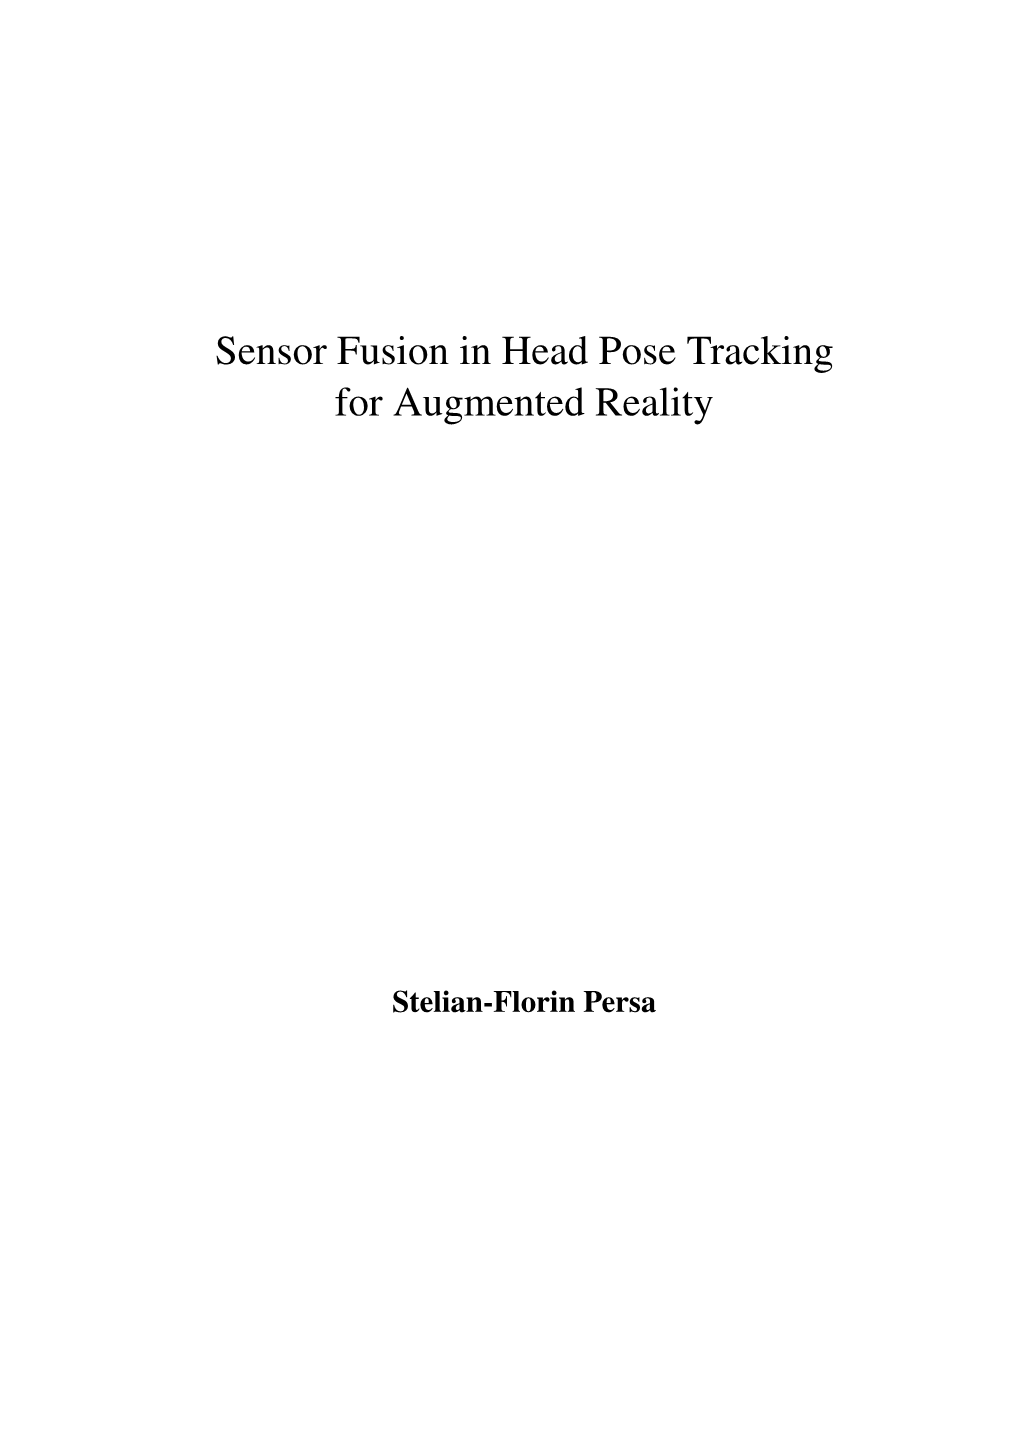 Sensor Fusion in Head Pose Tracking for Augmented Reality